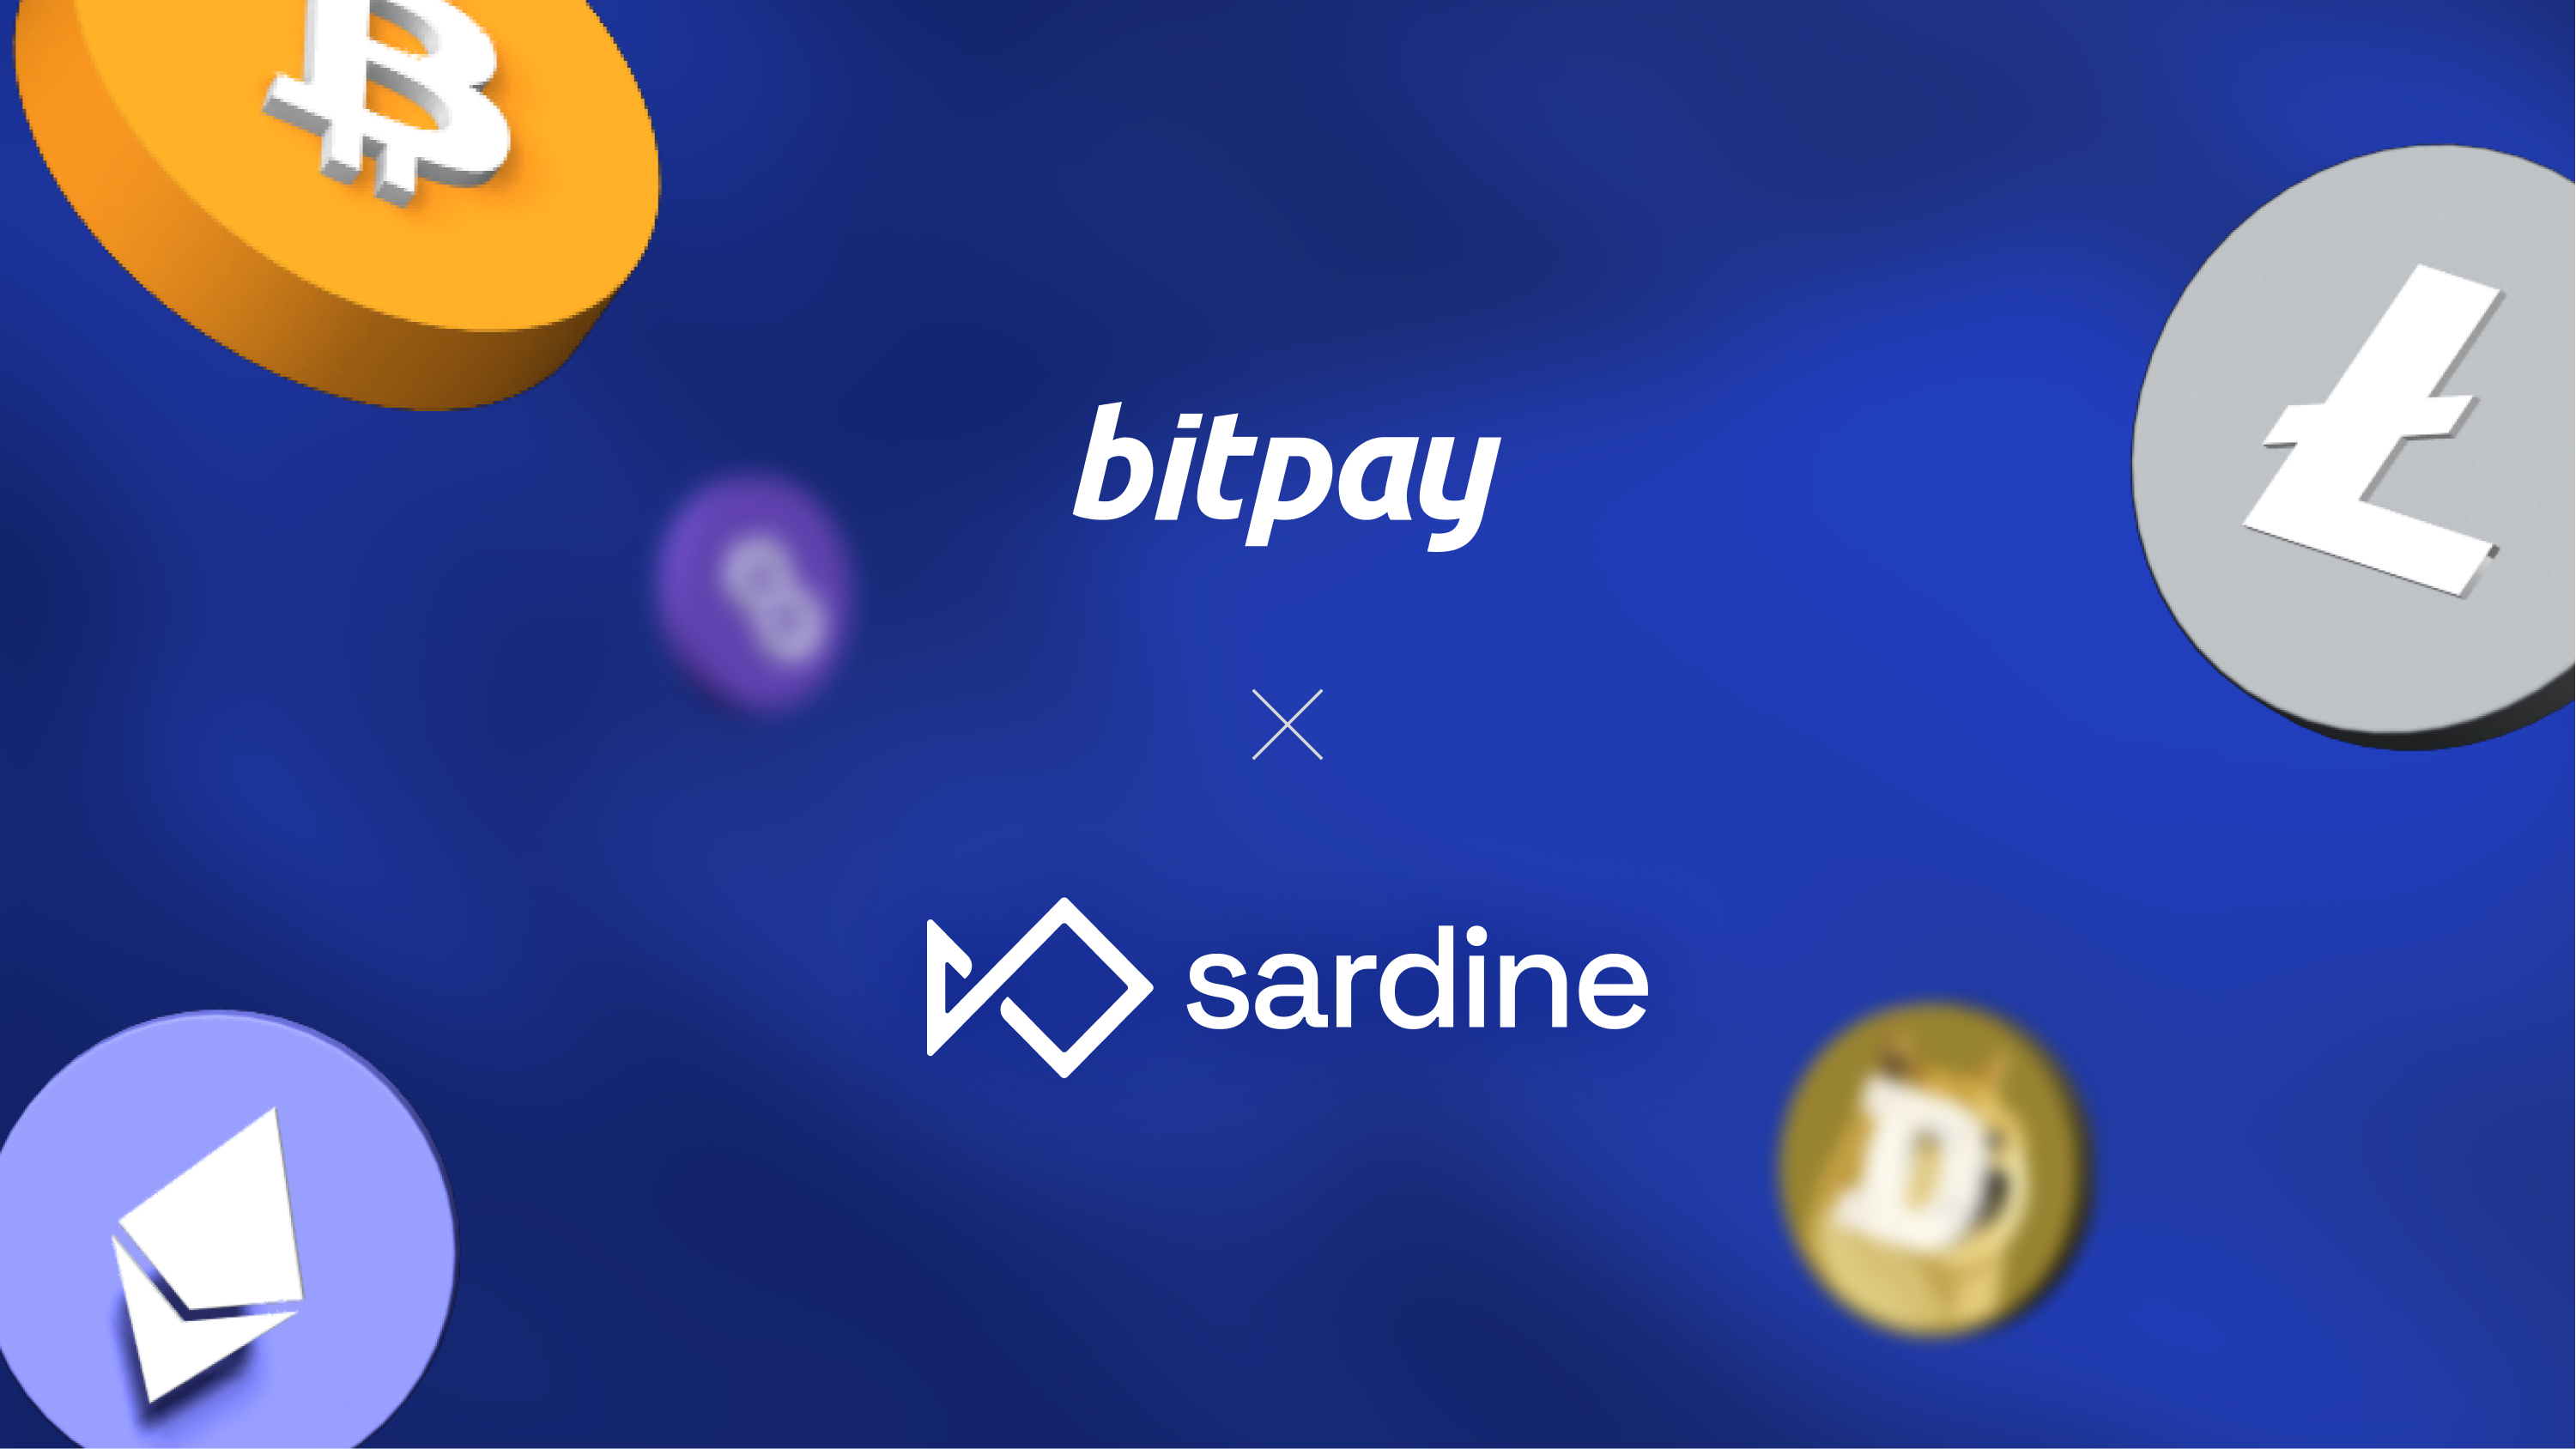 BitPay + Sardine: Buy Crypto with Your Bank Account, Lower Fees + Higher Buy Limits for BitPay Users